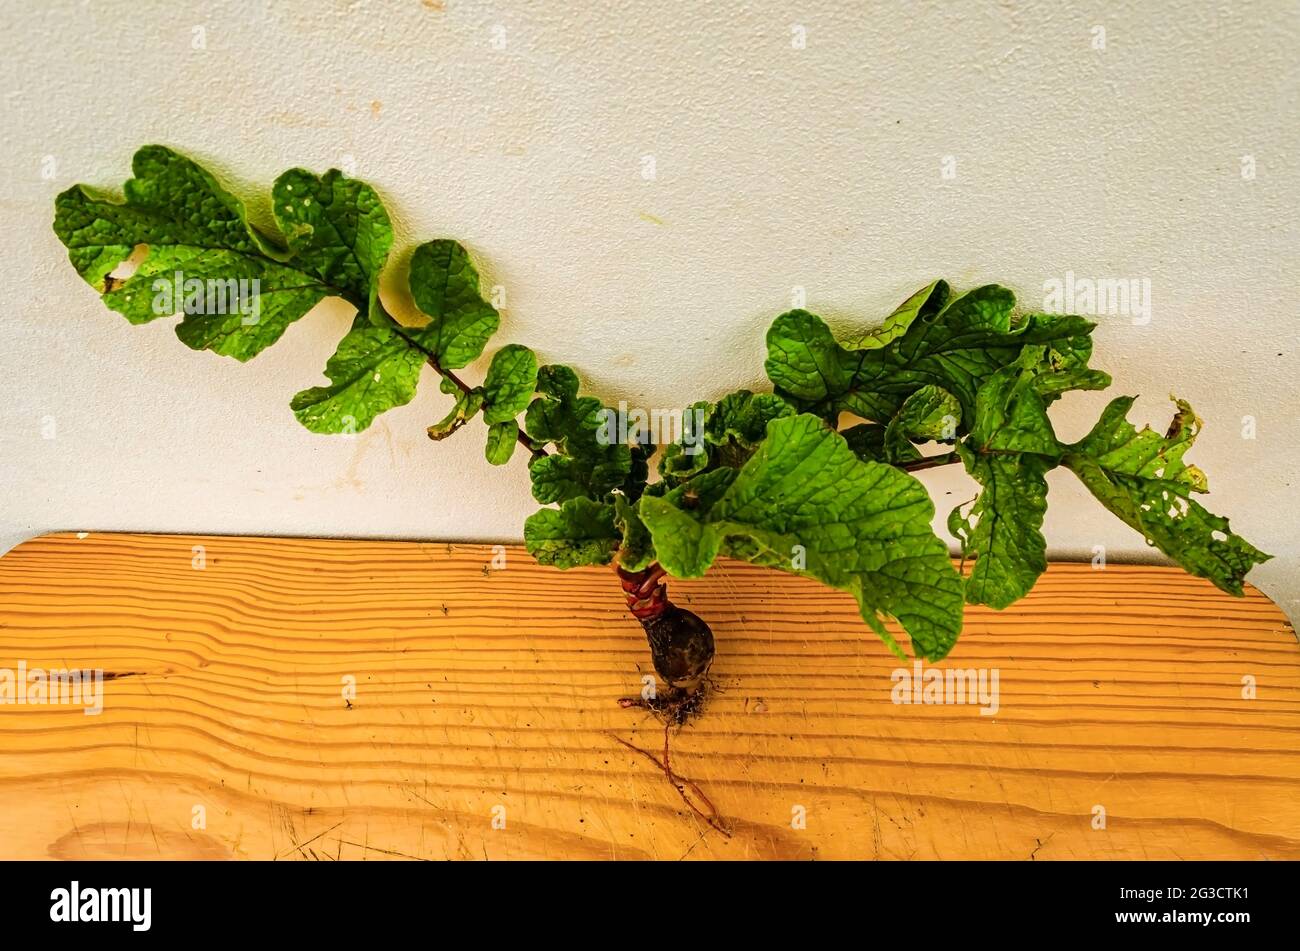 A smll radish attached to its leaves is resting on a board table against a wall. Stock Photo